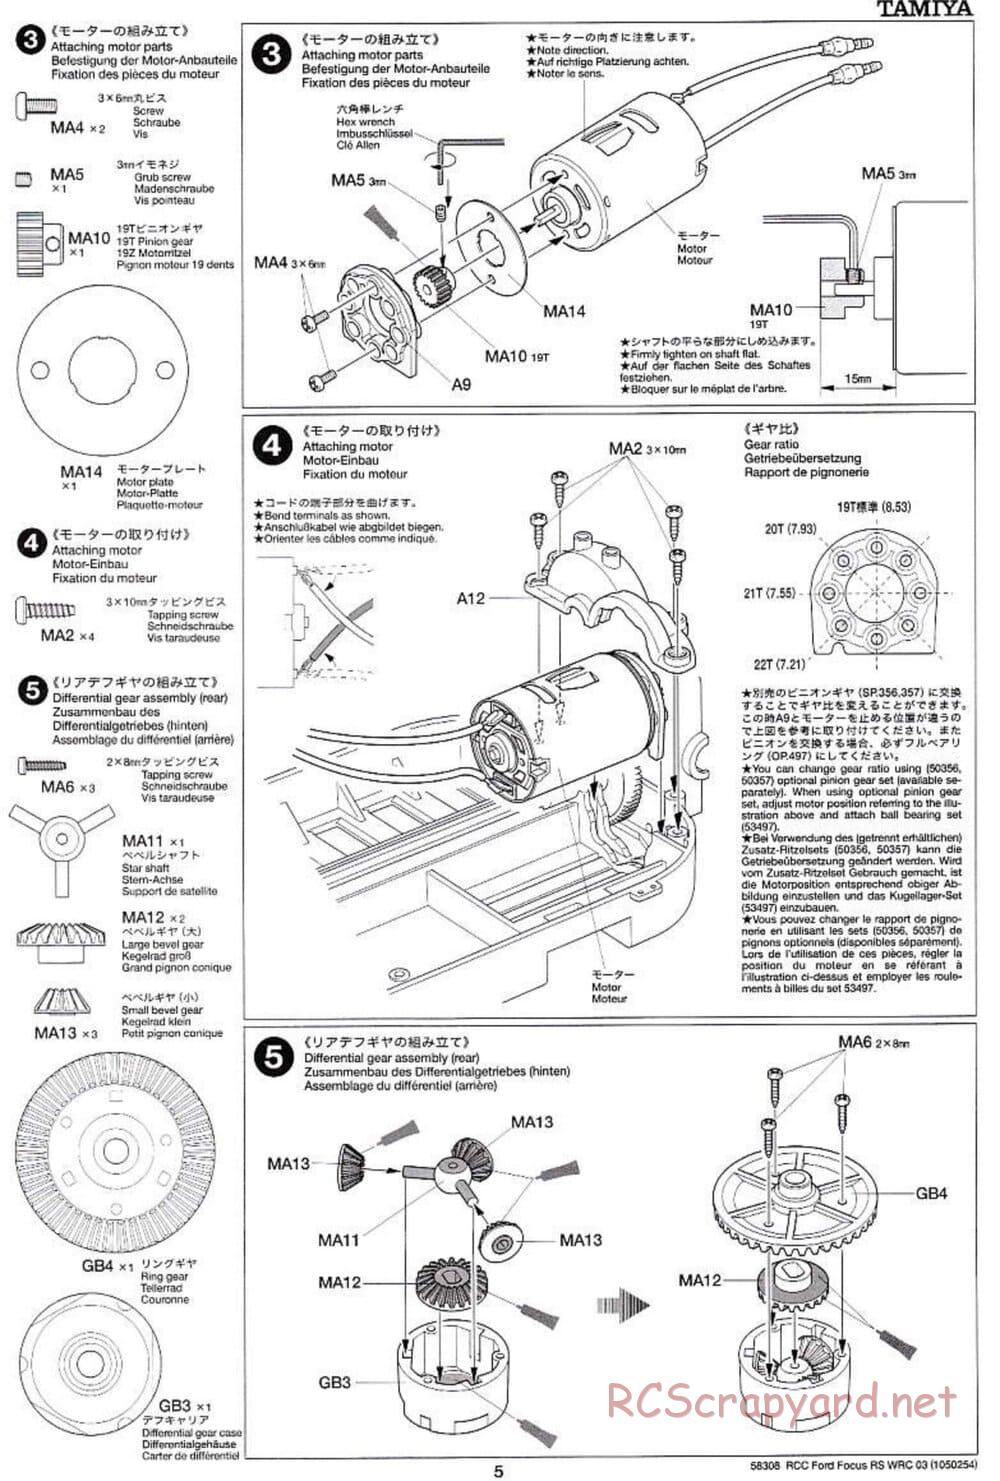 Tamiya - Ford Focus RS WRC 03 - TT-01 Chassis - Manual - Page 5